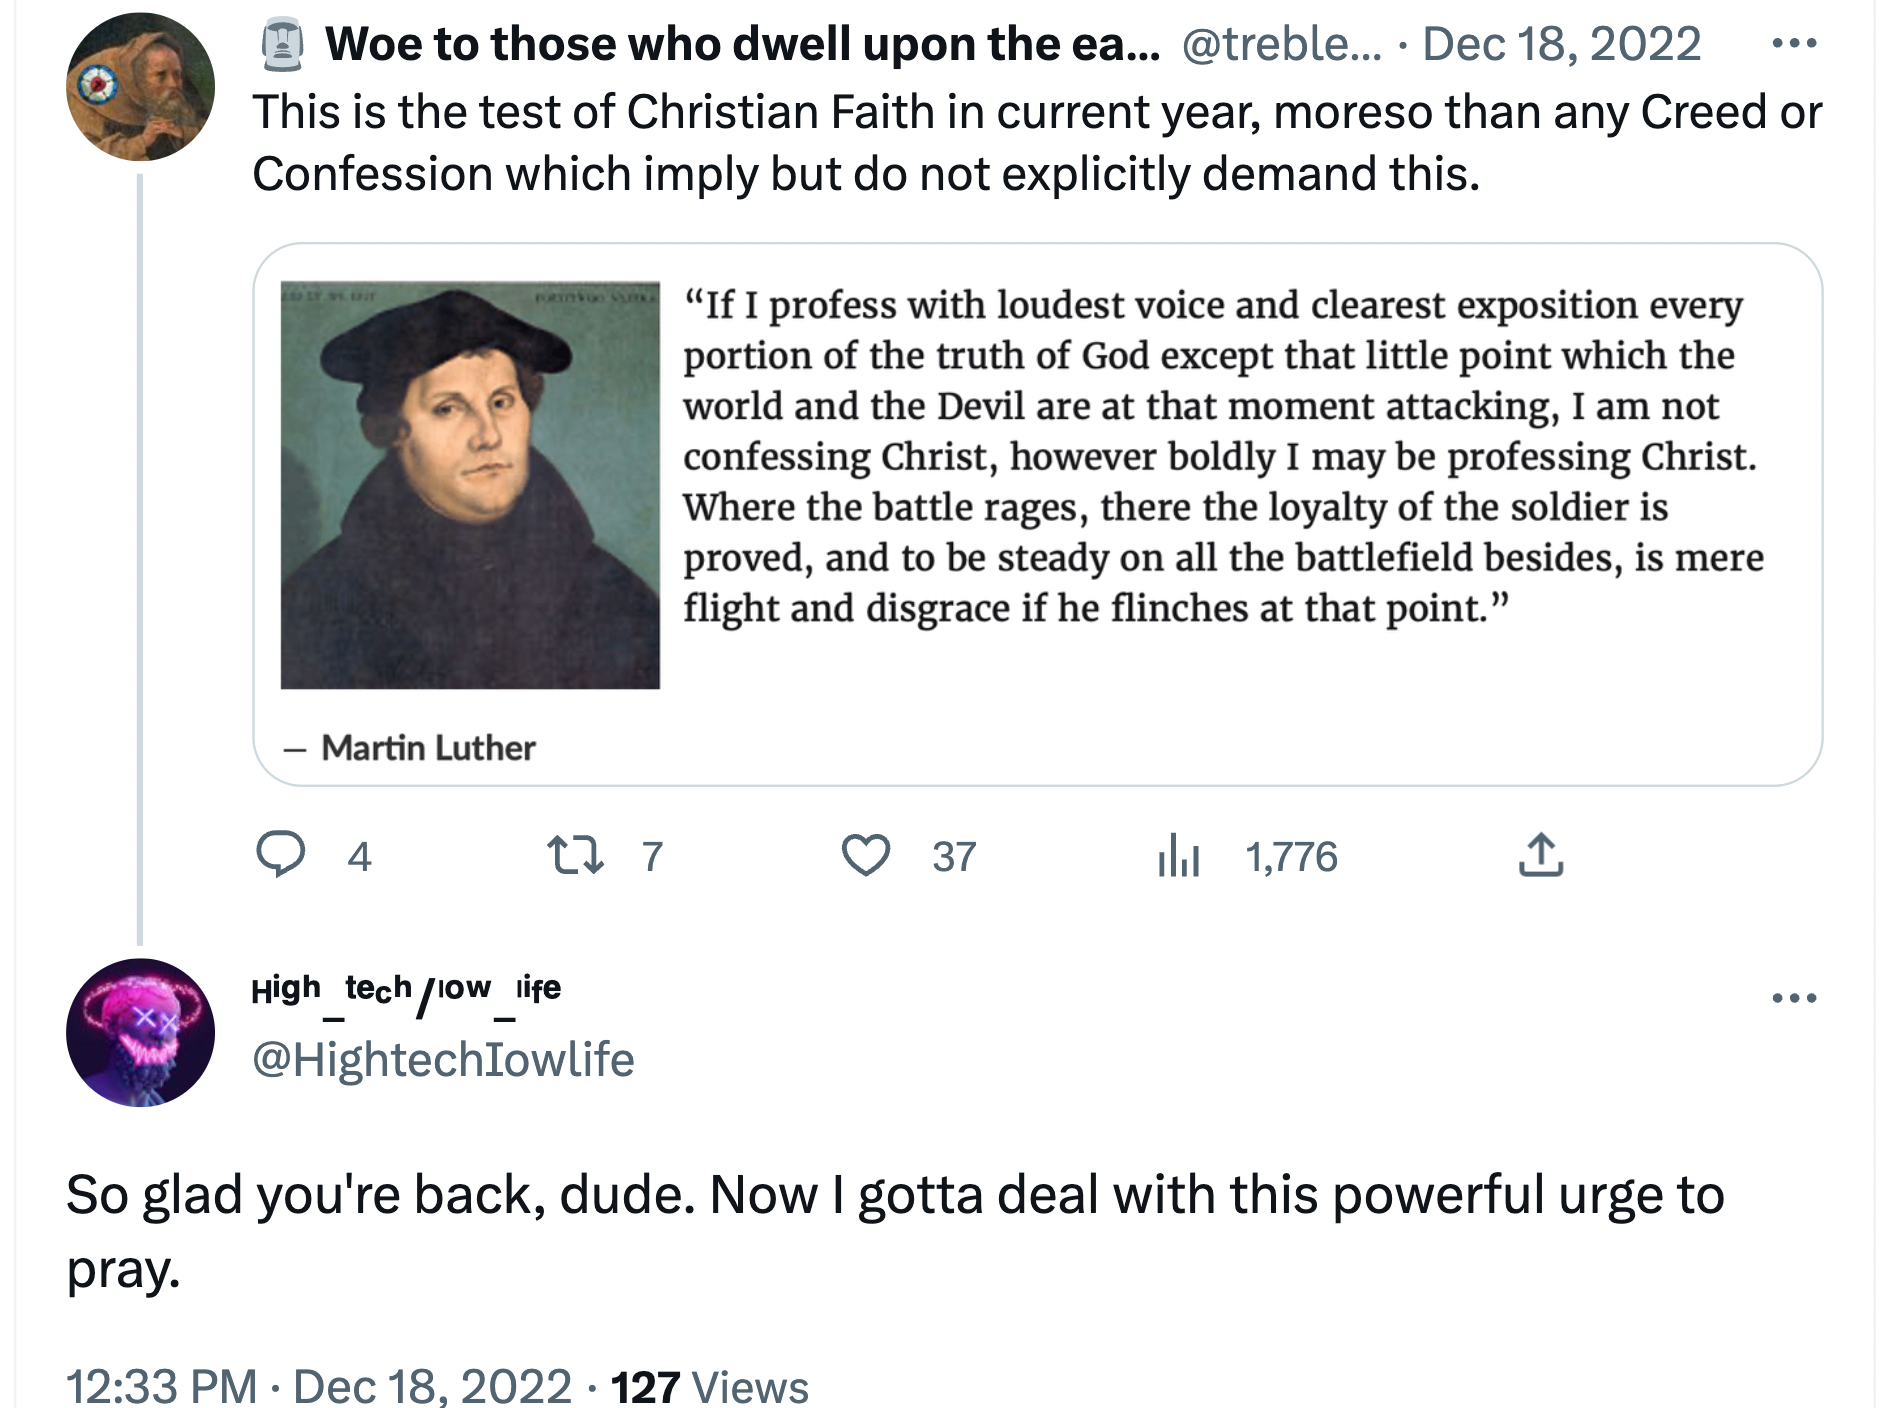 Woe QT'ing Martin Luther quote about professing Christ "on the battlefield." Woe says: This is the test of the Christian faith in current year, moreso than any creed or Confession which imply but do not explicitly demand this. @Hightechiowlife responds: So glad you're back, dude. Now I gotta deal with this powerful urge to pray.